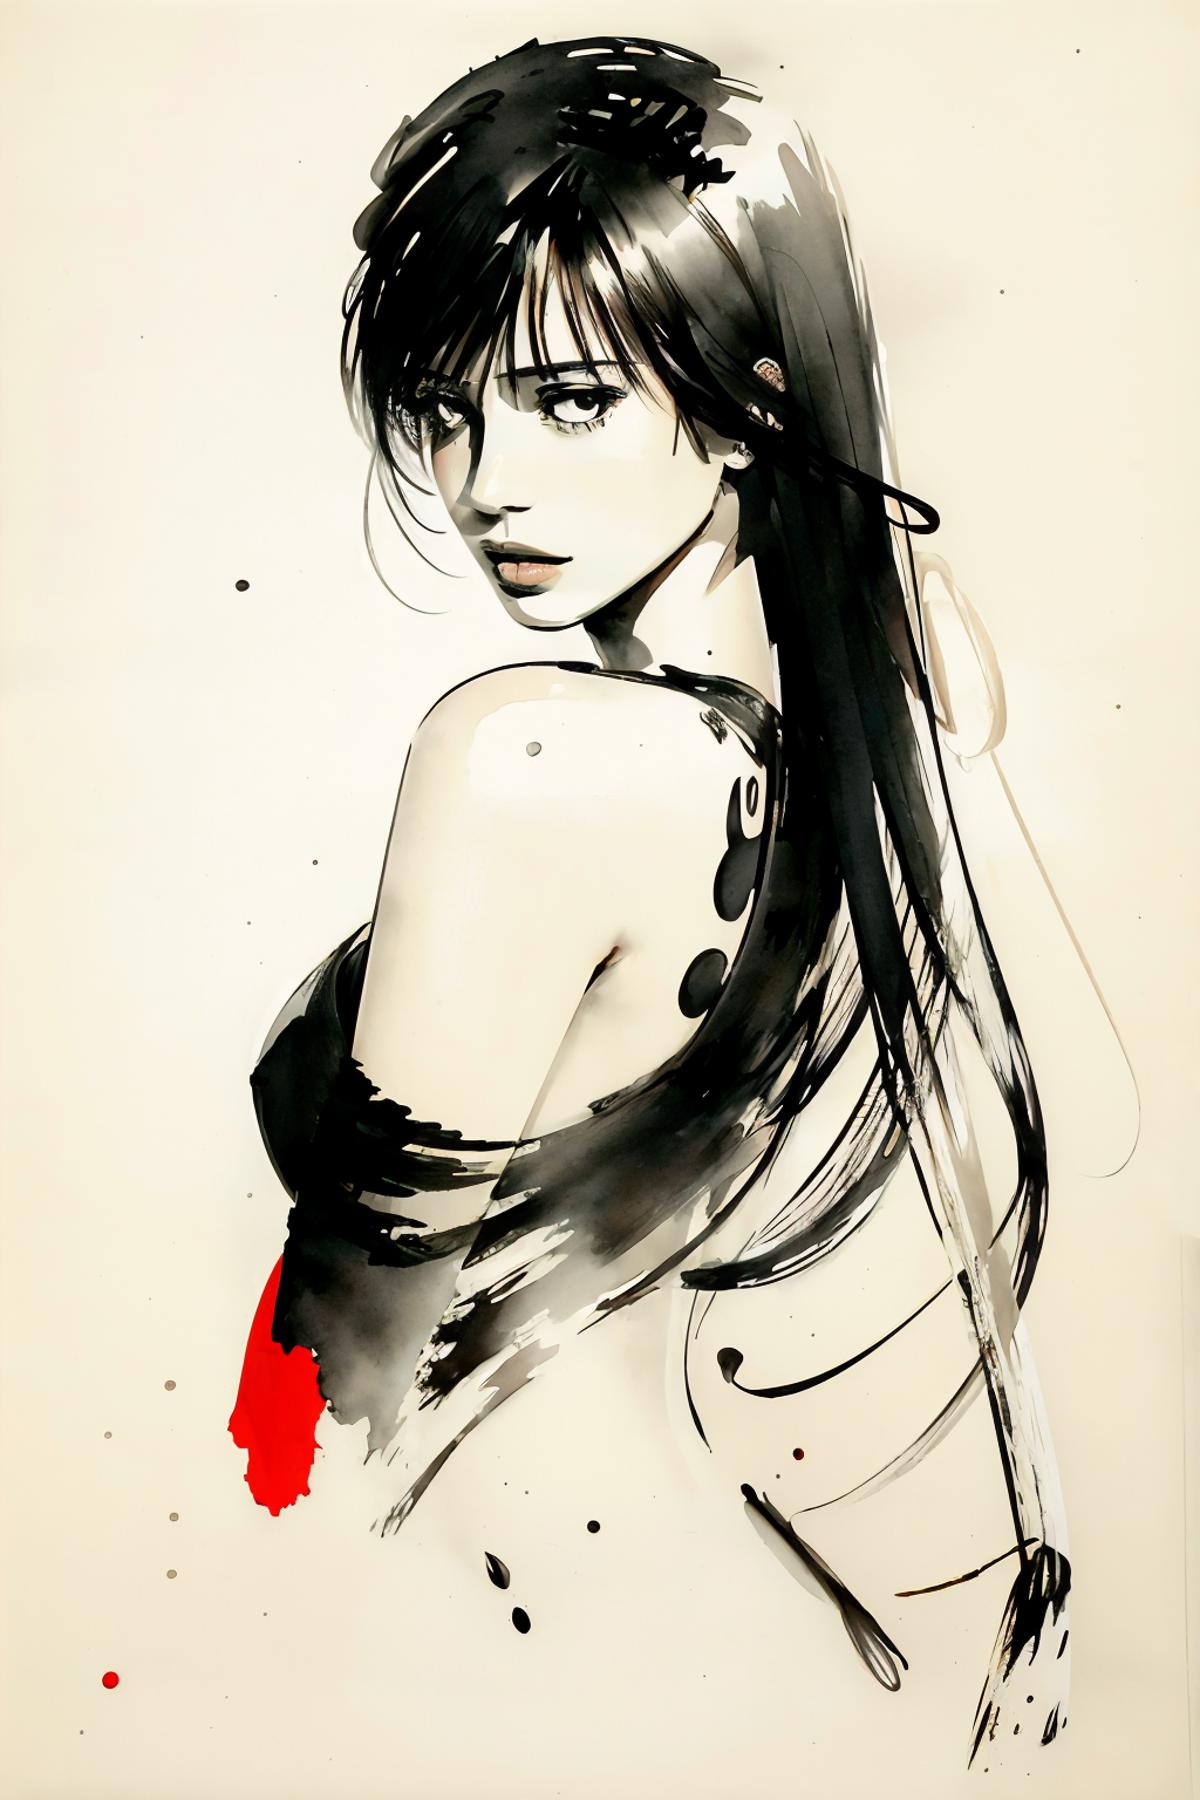 Artistic Drawing of a Woman with Black Hair and Red Shirt.